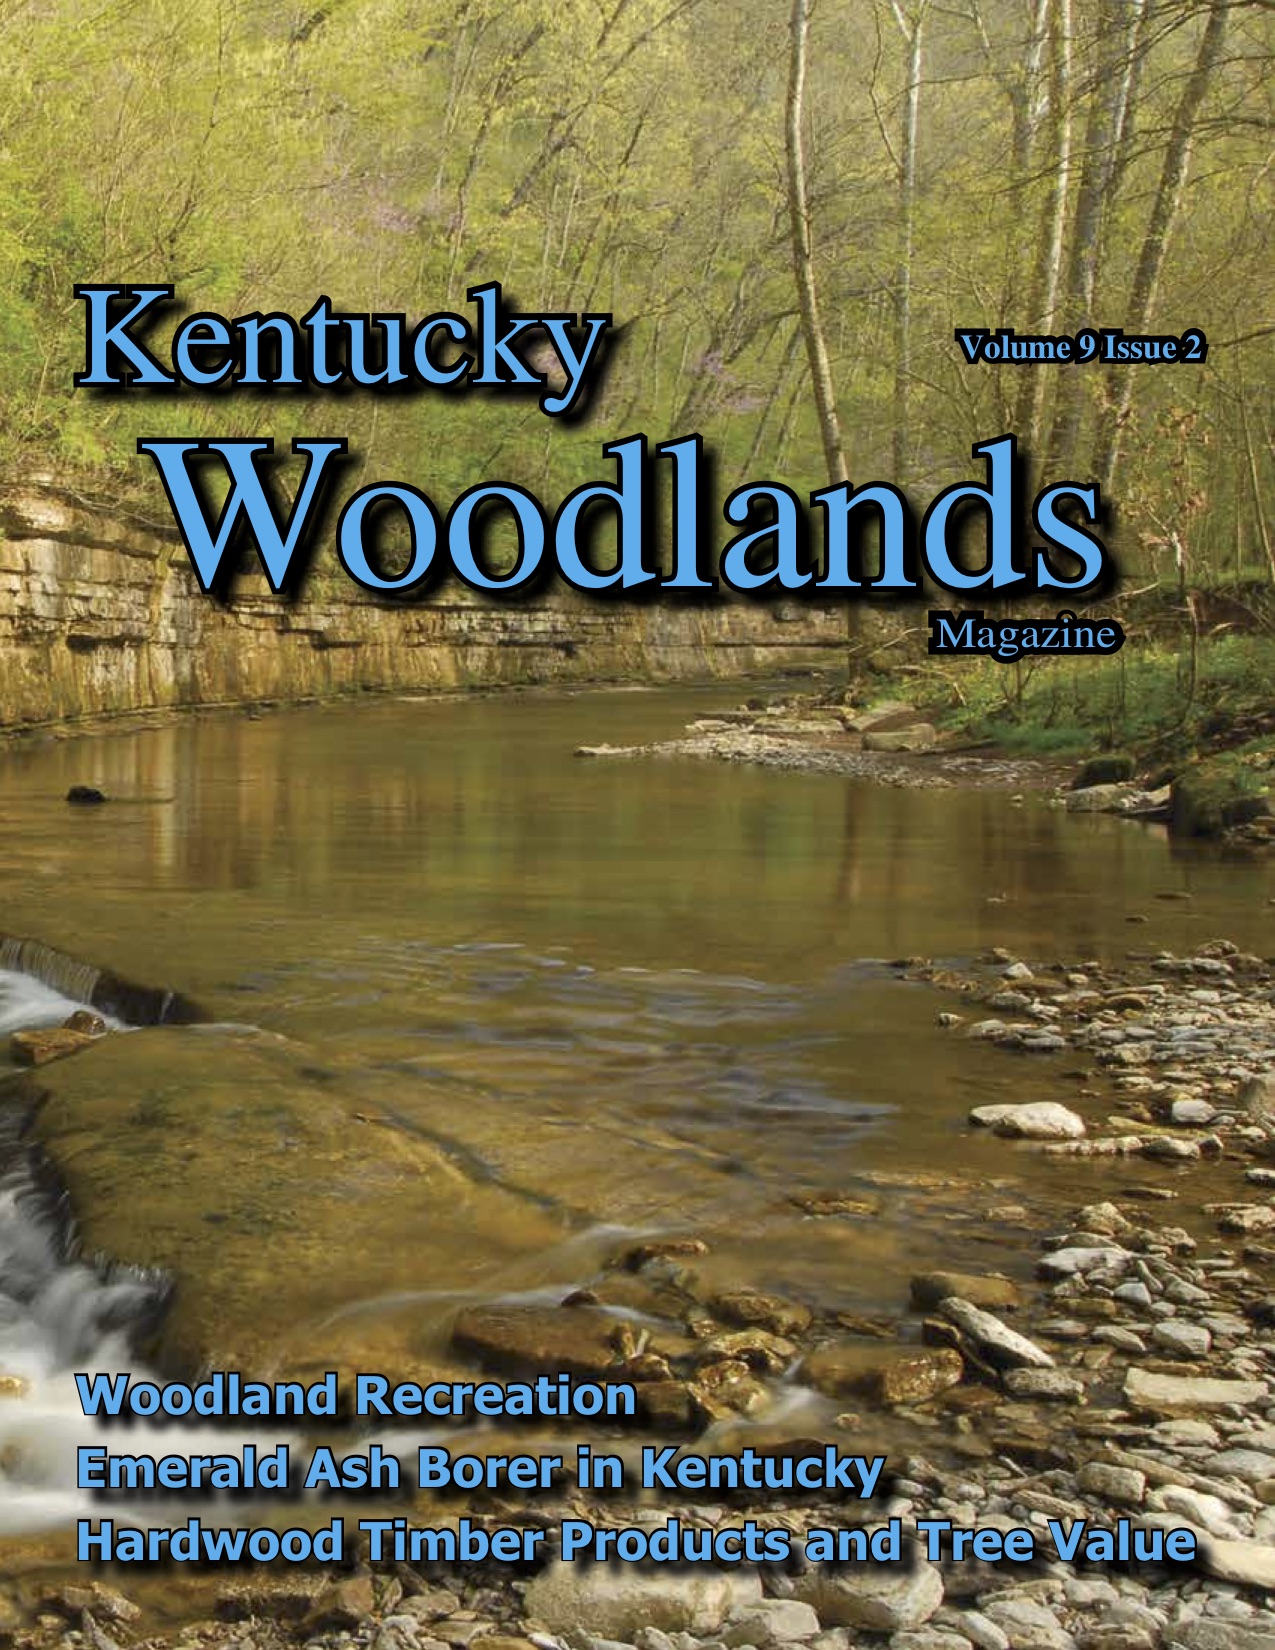 Kentucky Woodlands Magazine, Volume 9, Issue 2 Cover